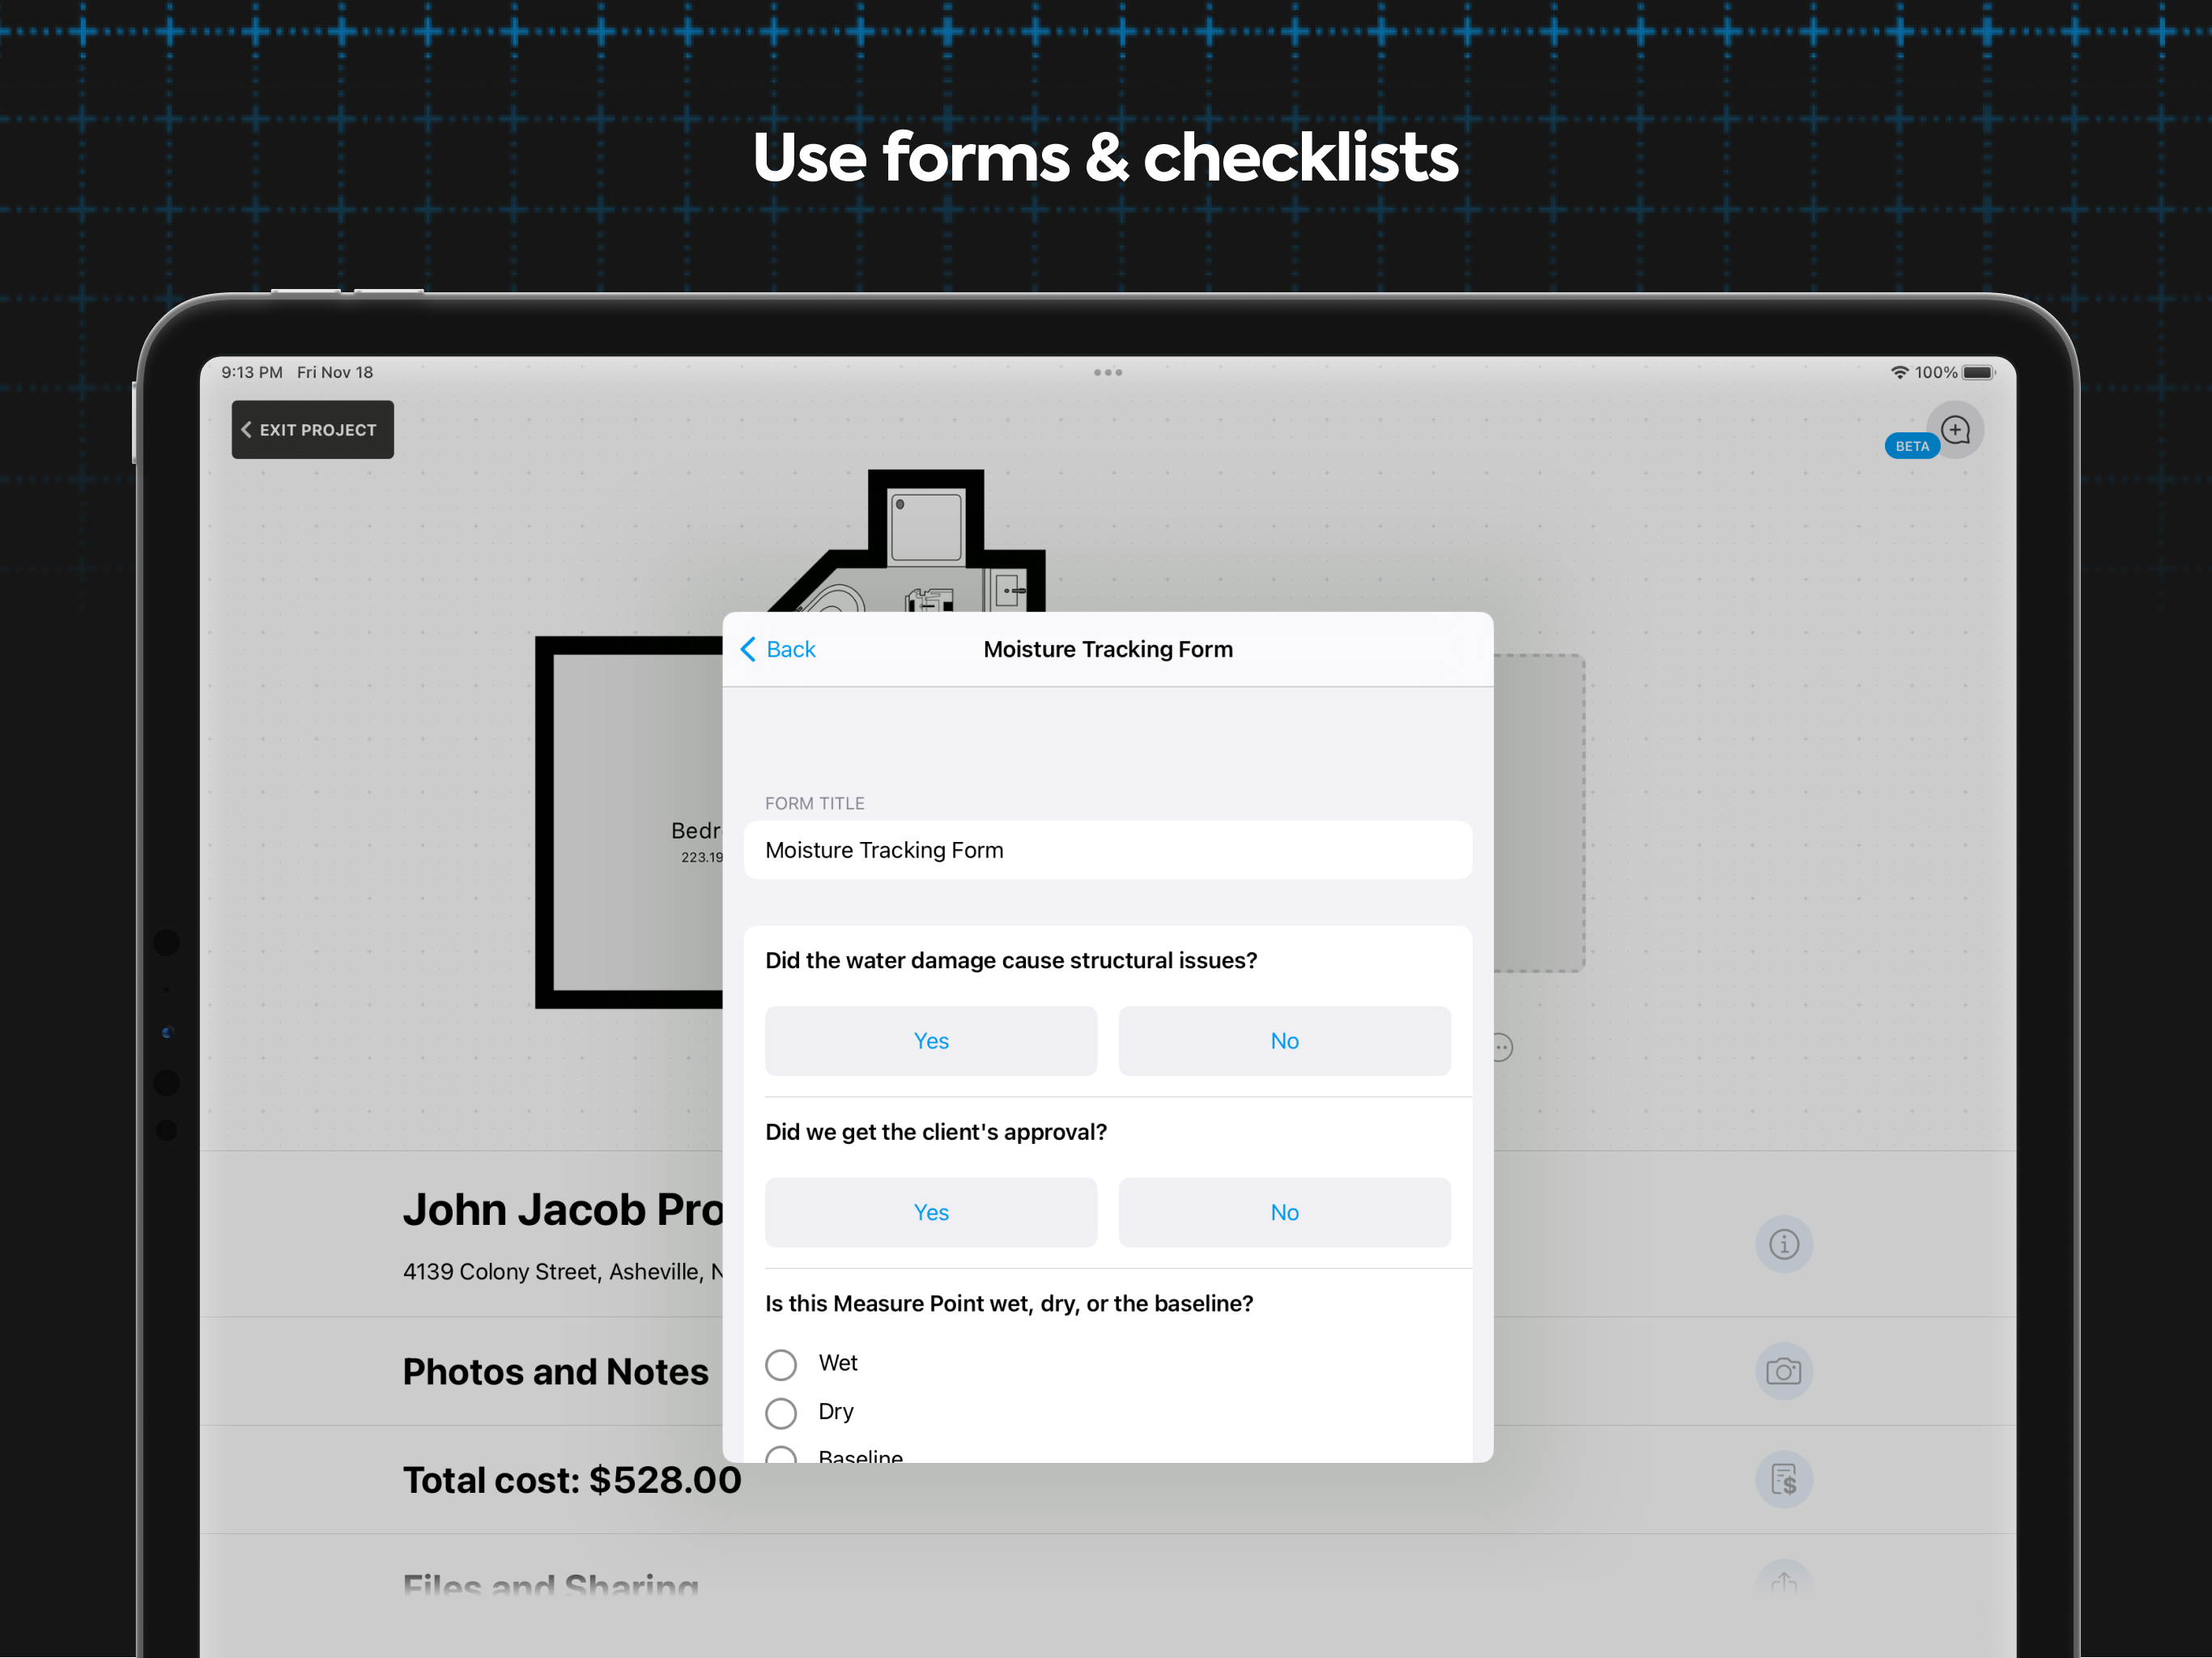 Easily create templates for forms, questionnaires, and checklists. Adapt them to your needs, share with others, and collect information in a unified way for all your projects.